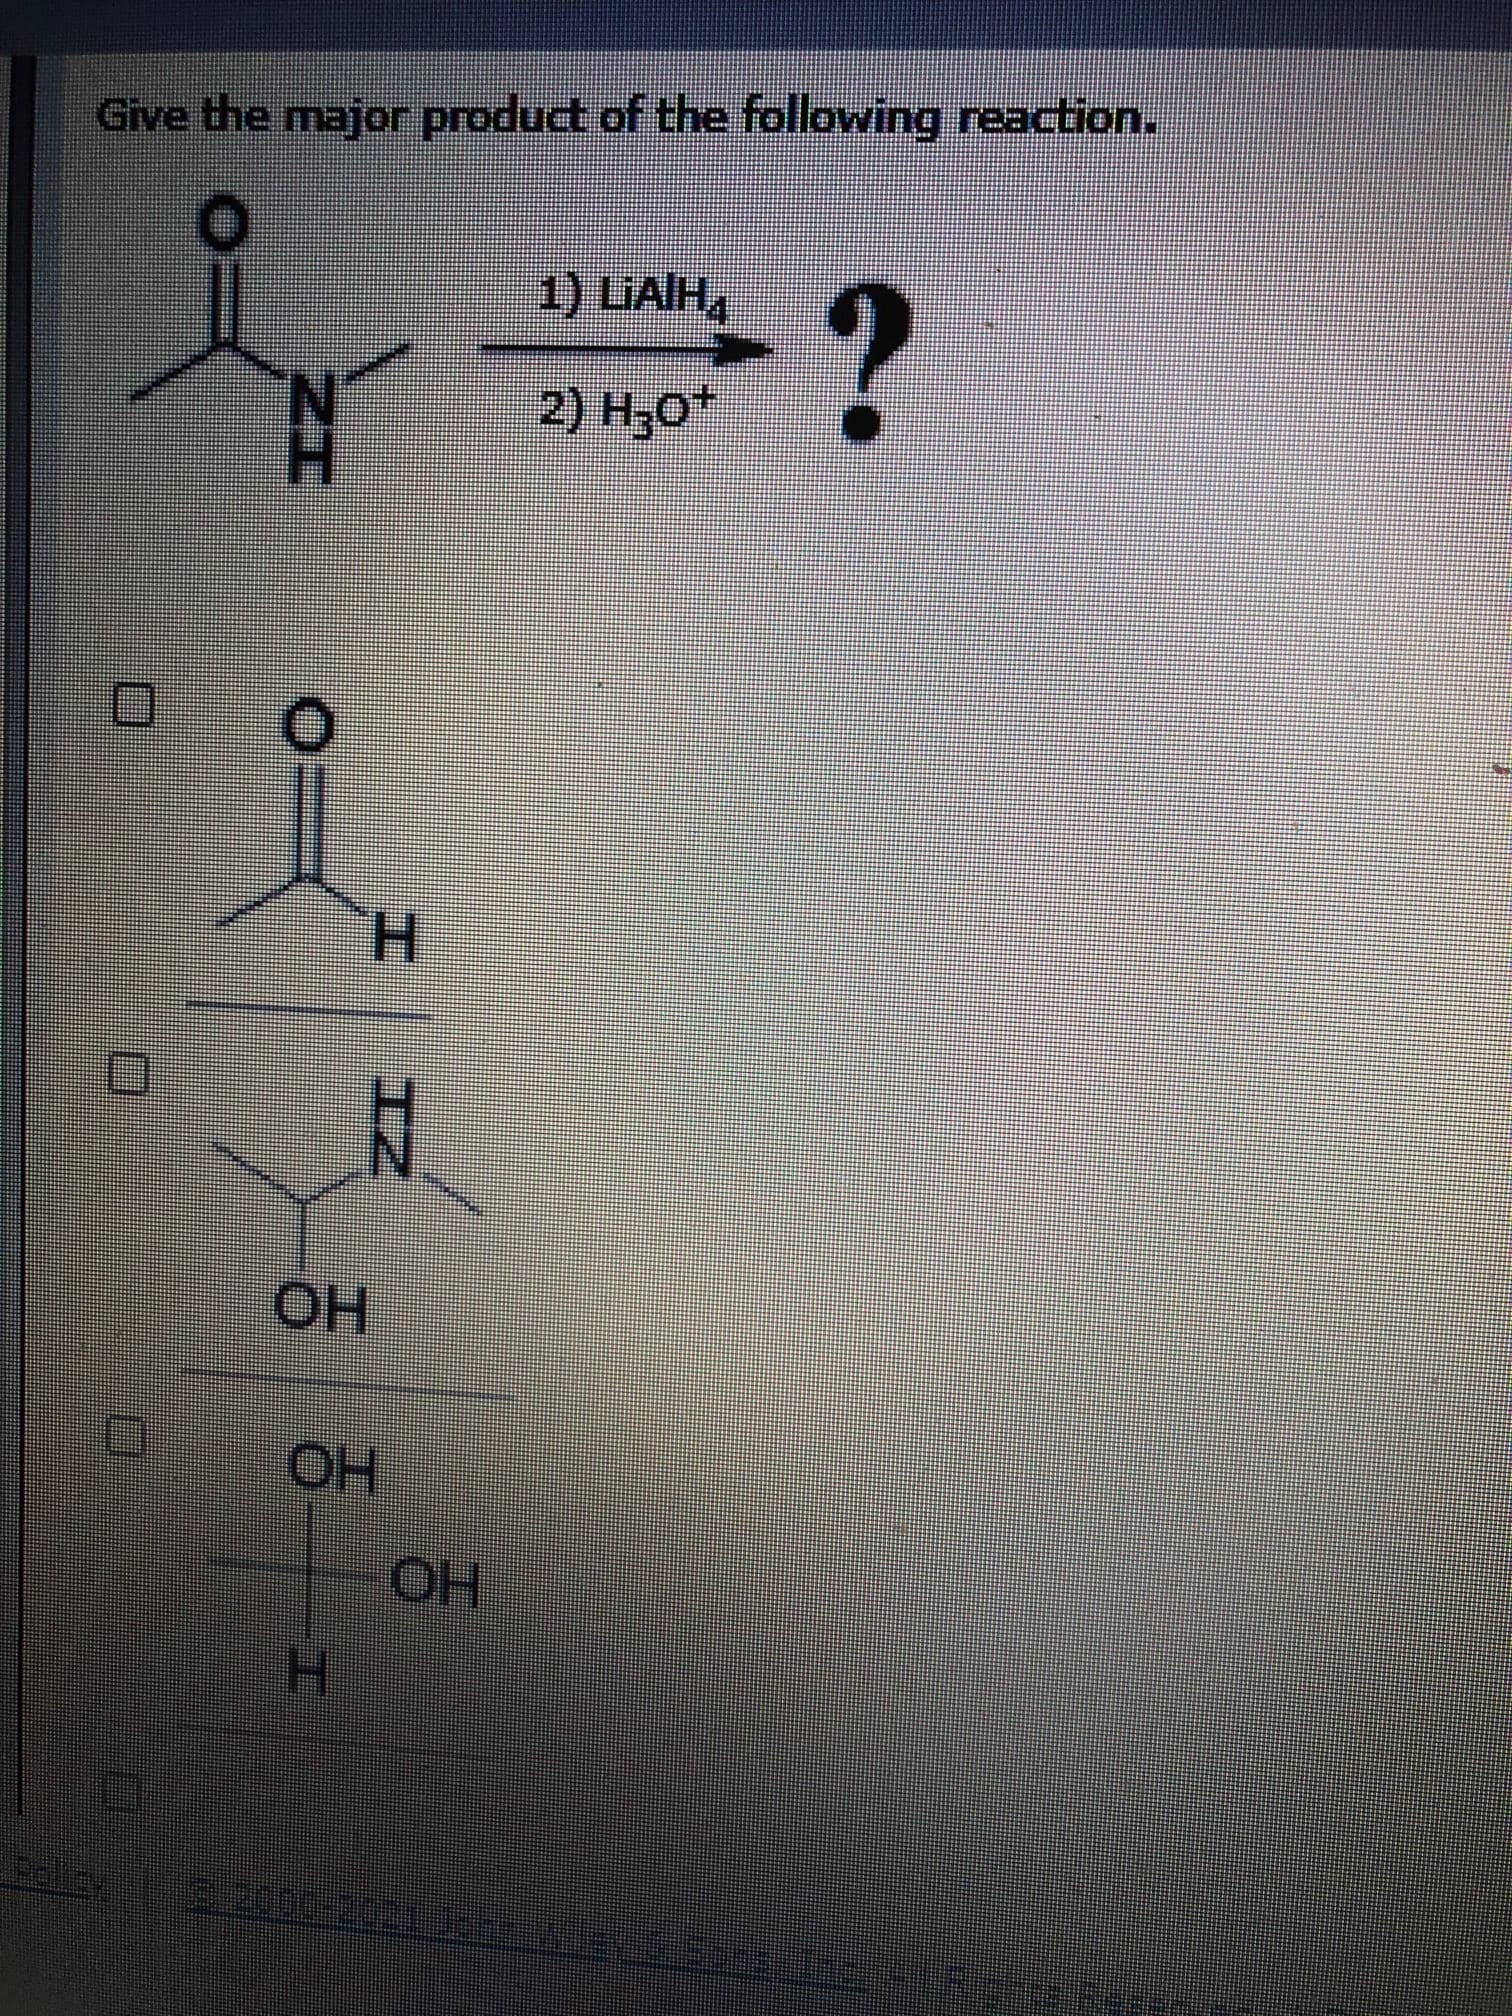 Give the major product of the following reaction.
1) LAIH,
2) H,0*
